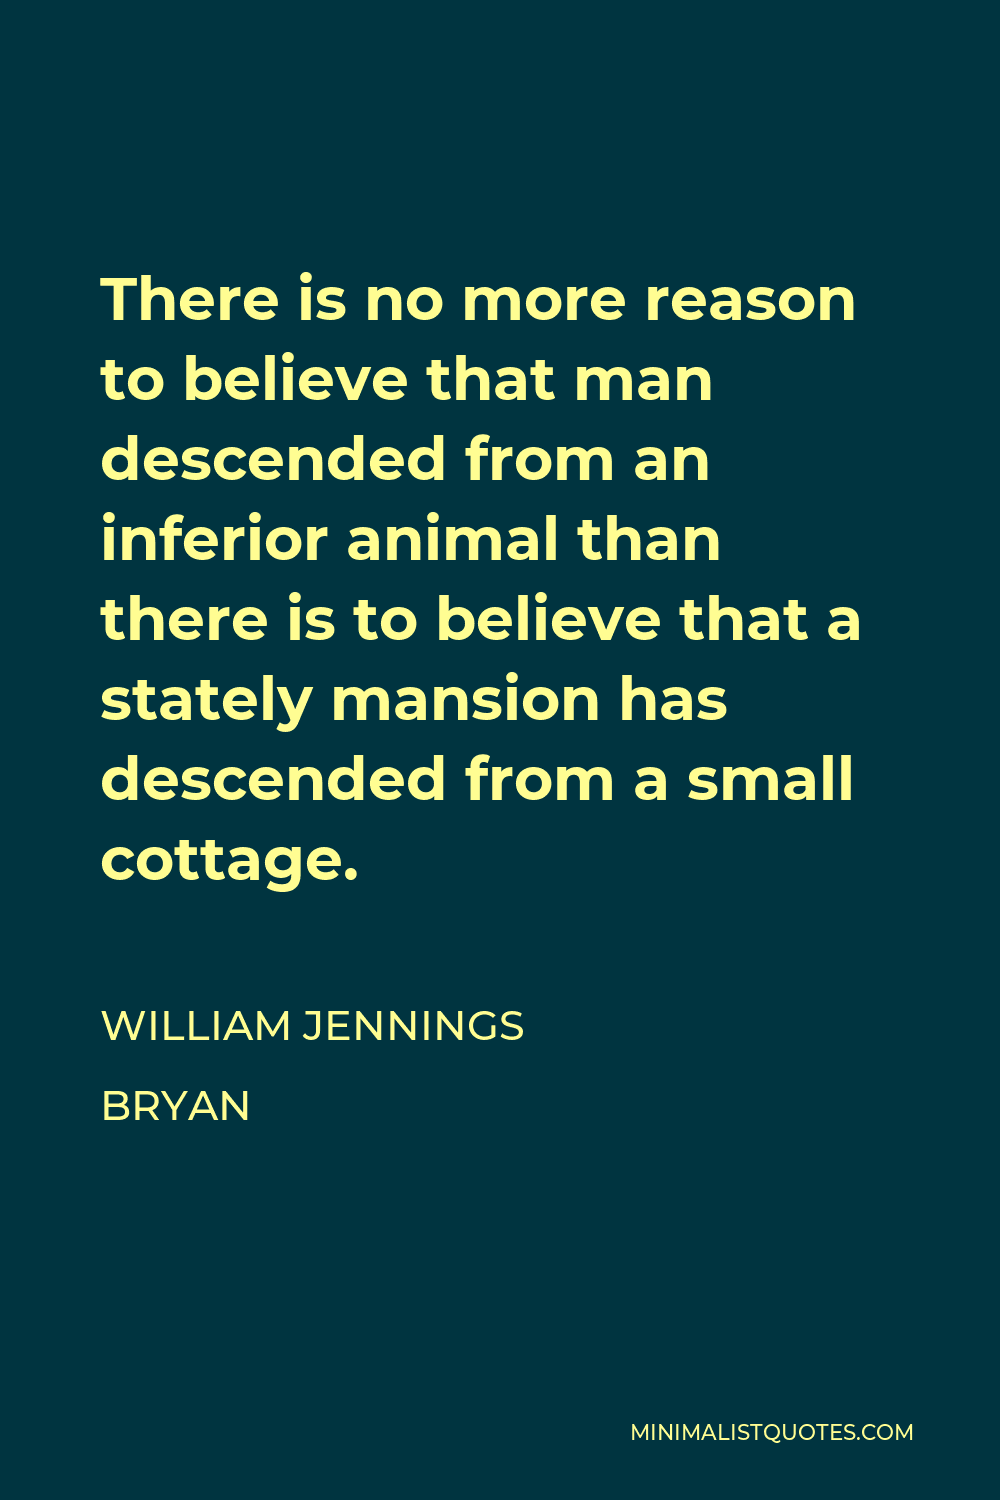 William Jennings Bryan Quote - There is no more reason to believe that man descended from an inferior animal than there is to believe that a stately mansion has descended from a small cottage.